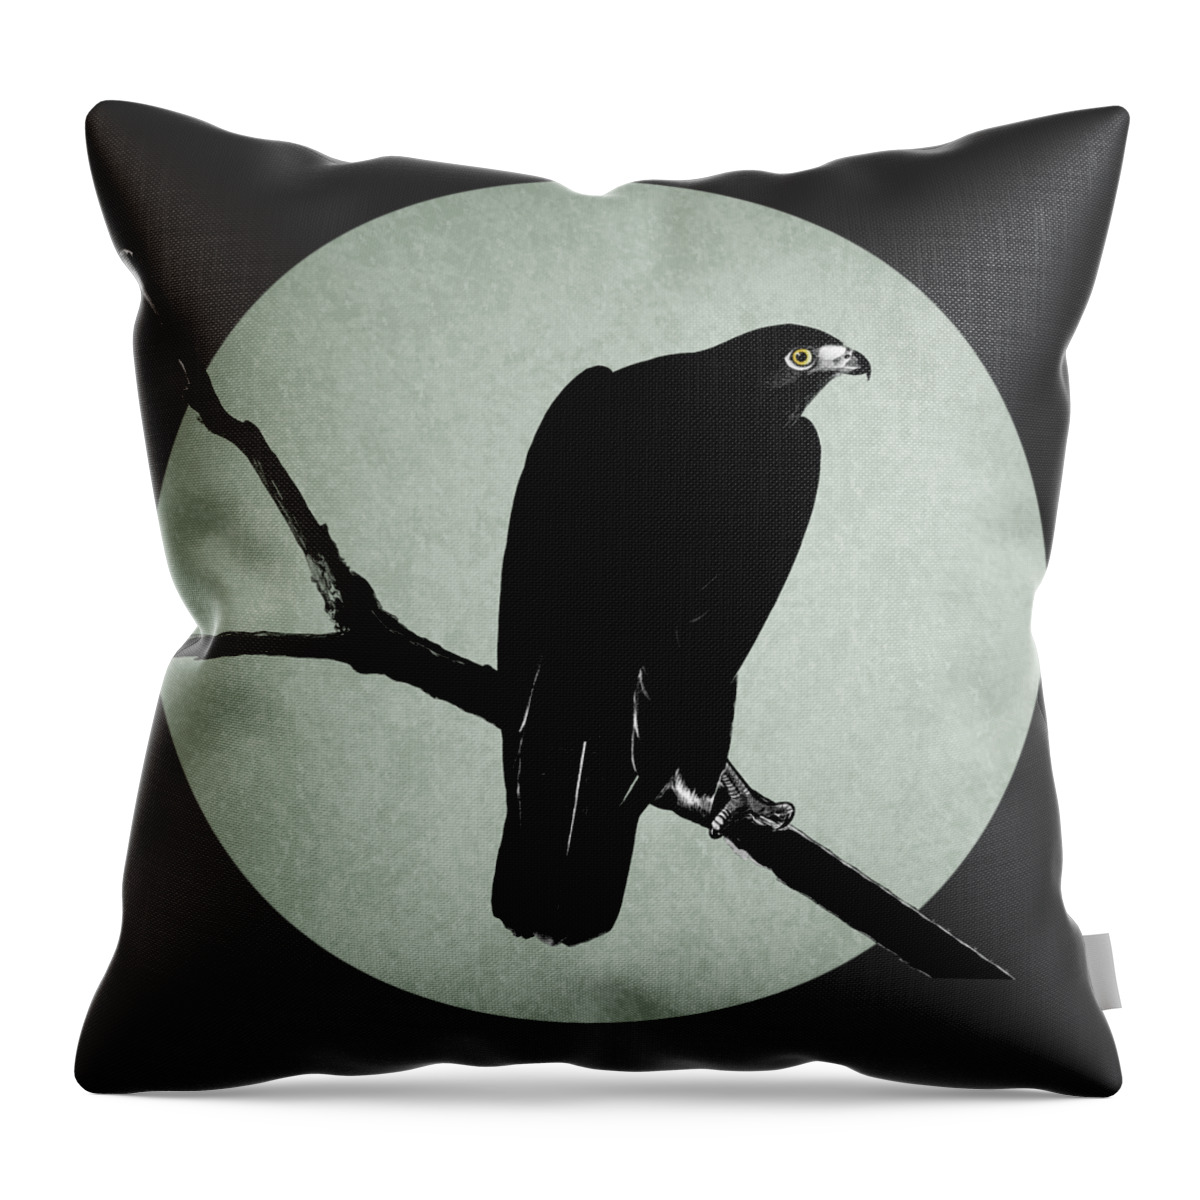 Hawk Throw Pillow featuring the drawing The Hawk by Mark Rogan